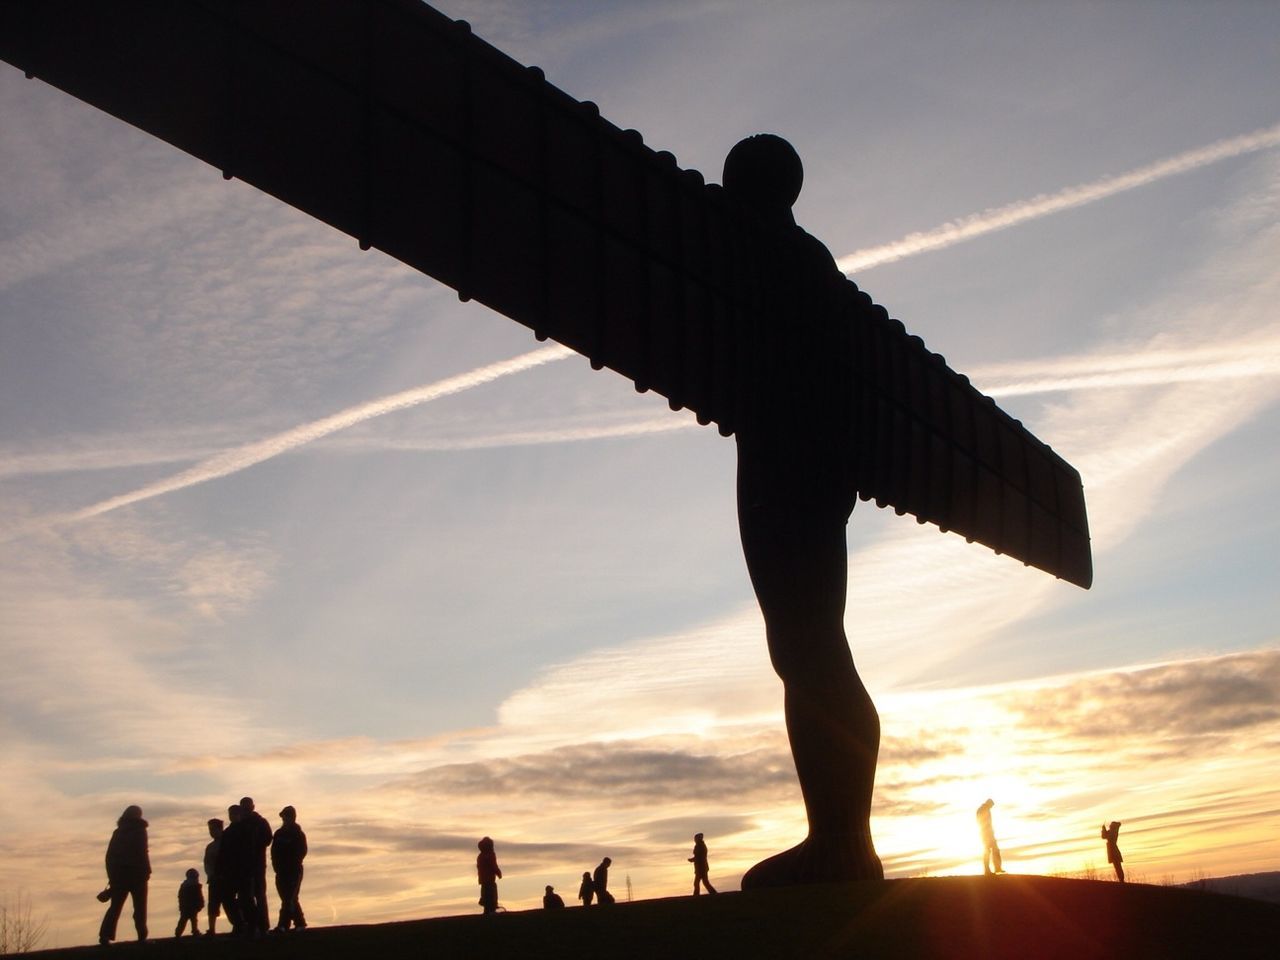 Angel of the north 2009